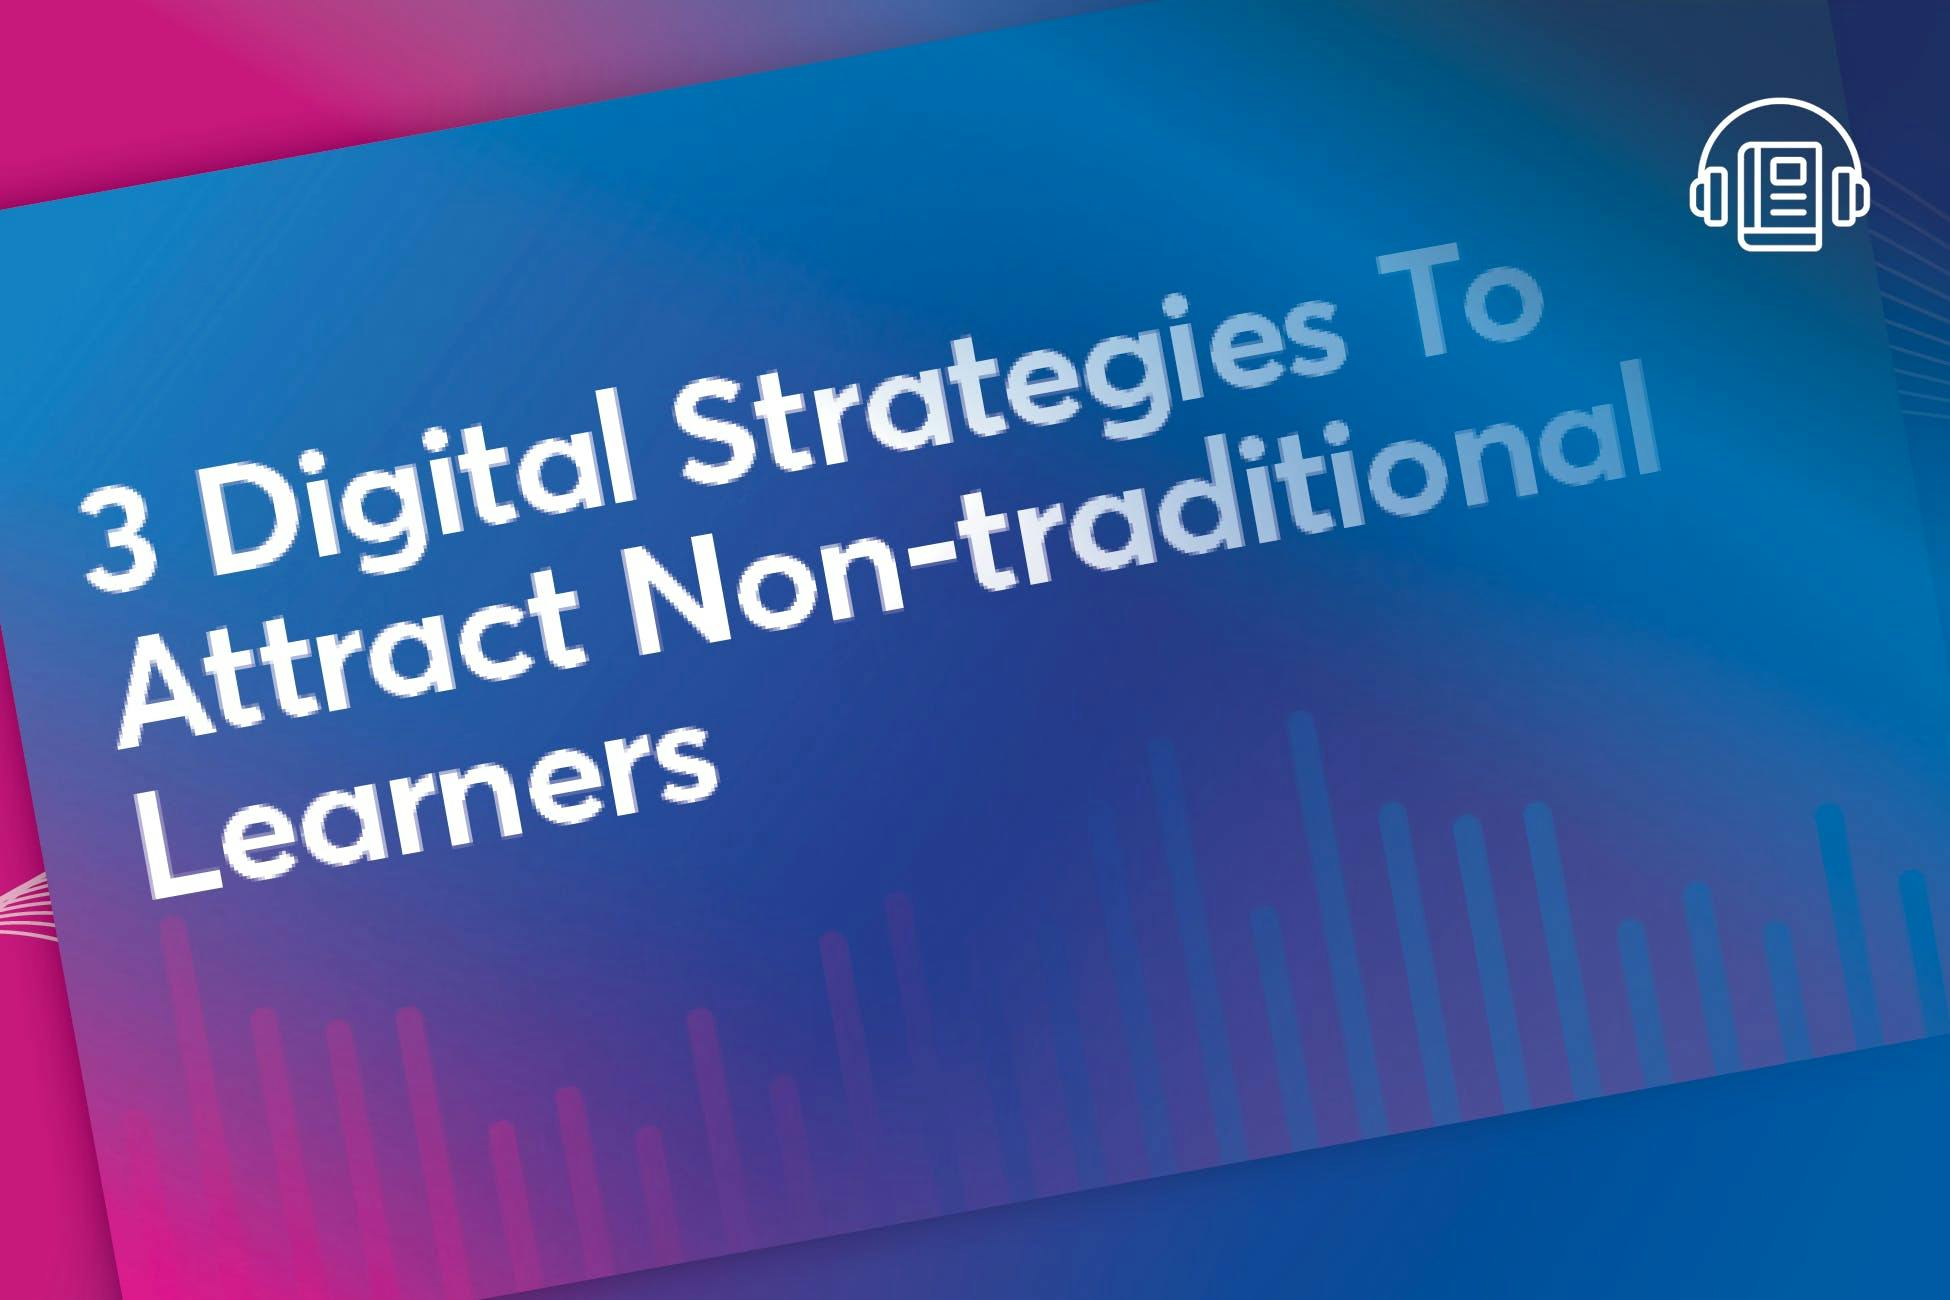 3 Digital Strategies to Attract Non-Traditional Learners